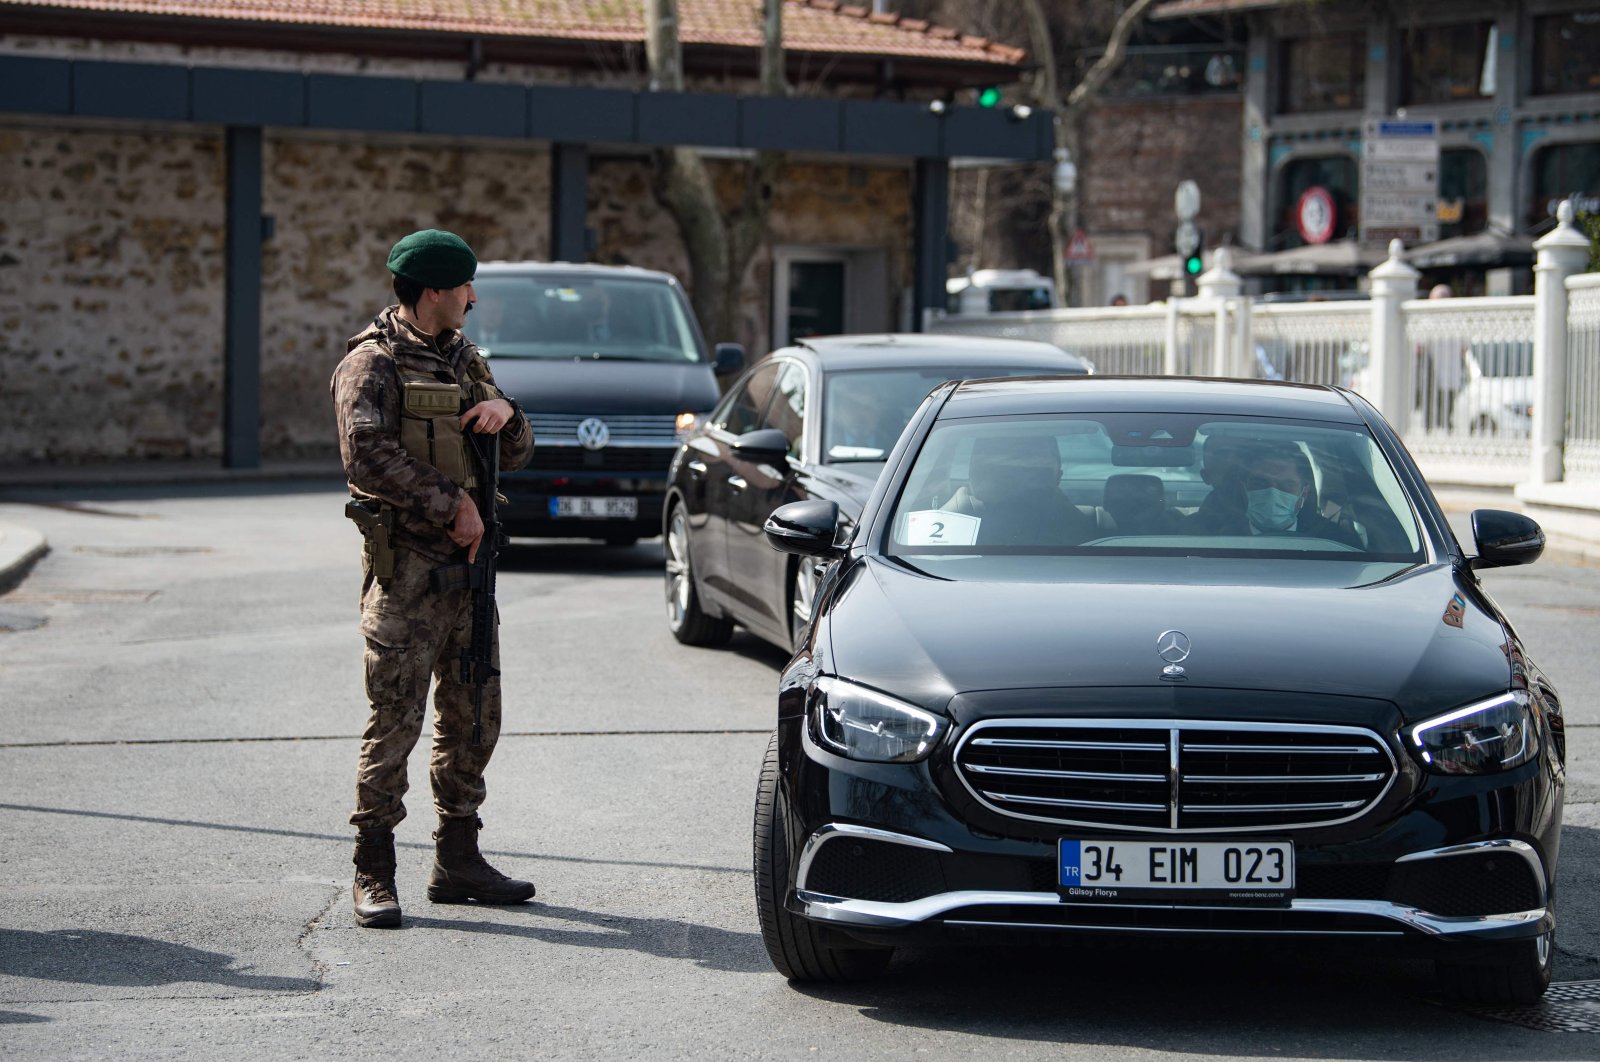 A security personnel stands guard as Ukrainian delegation cars leave the first Russia and Ukraine face-to-face talks in weeks at Dolmabahçe Palace in Istanbul, Turkey, March 29, 2022 (AFP Photo)